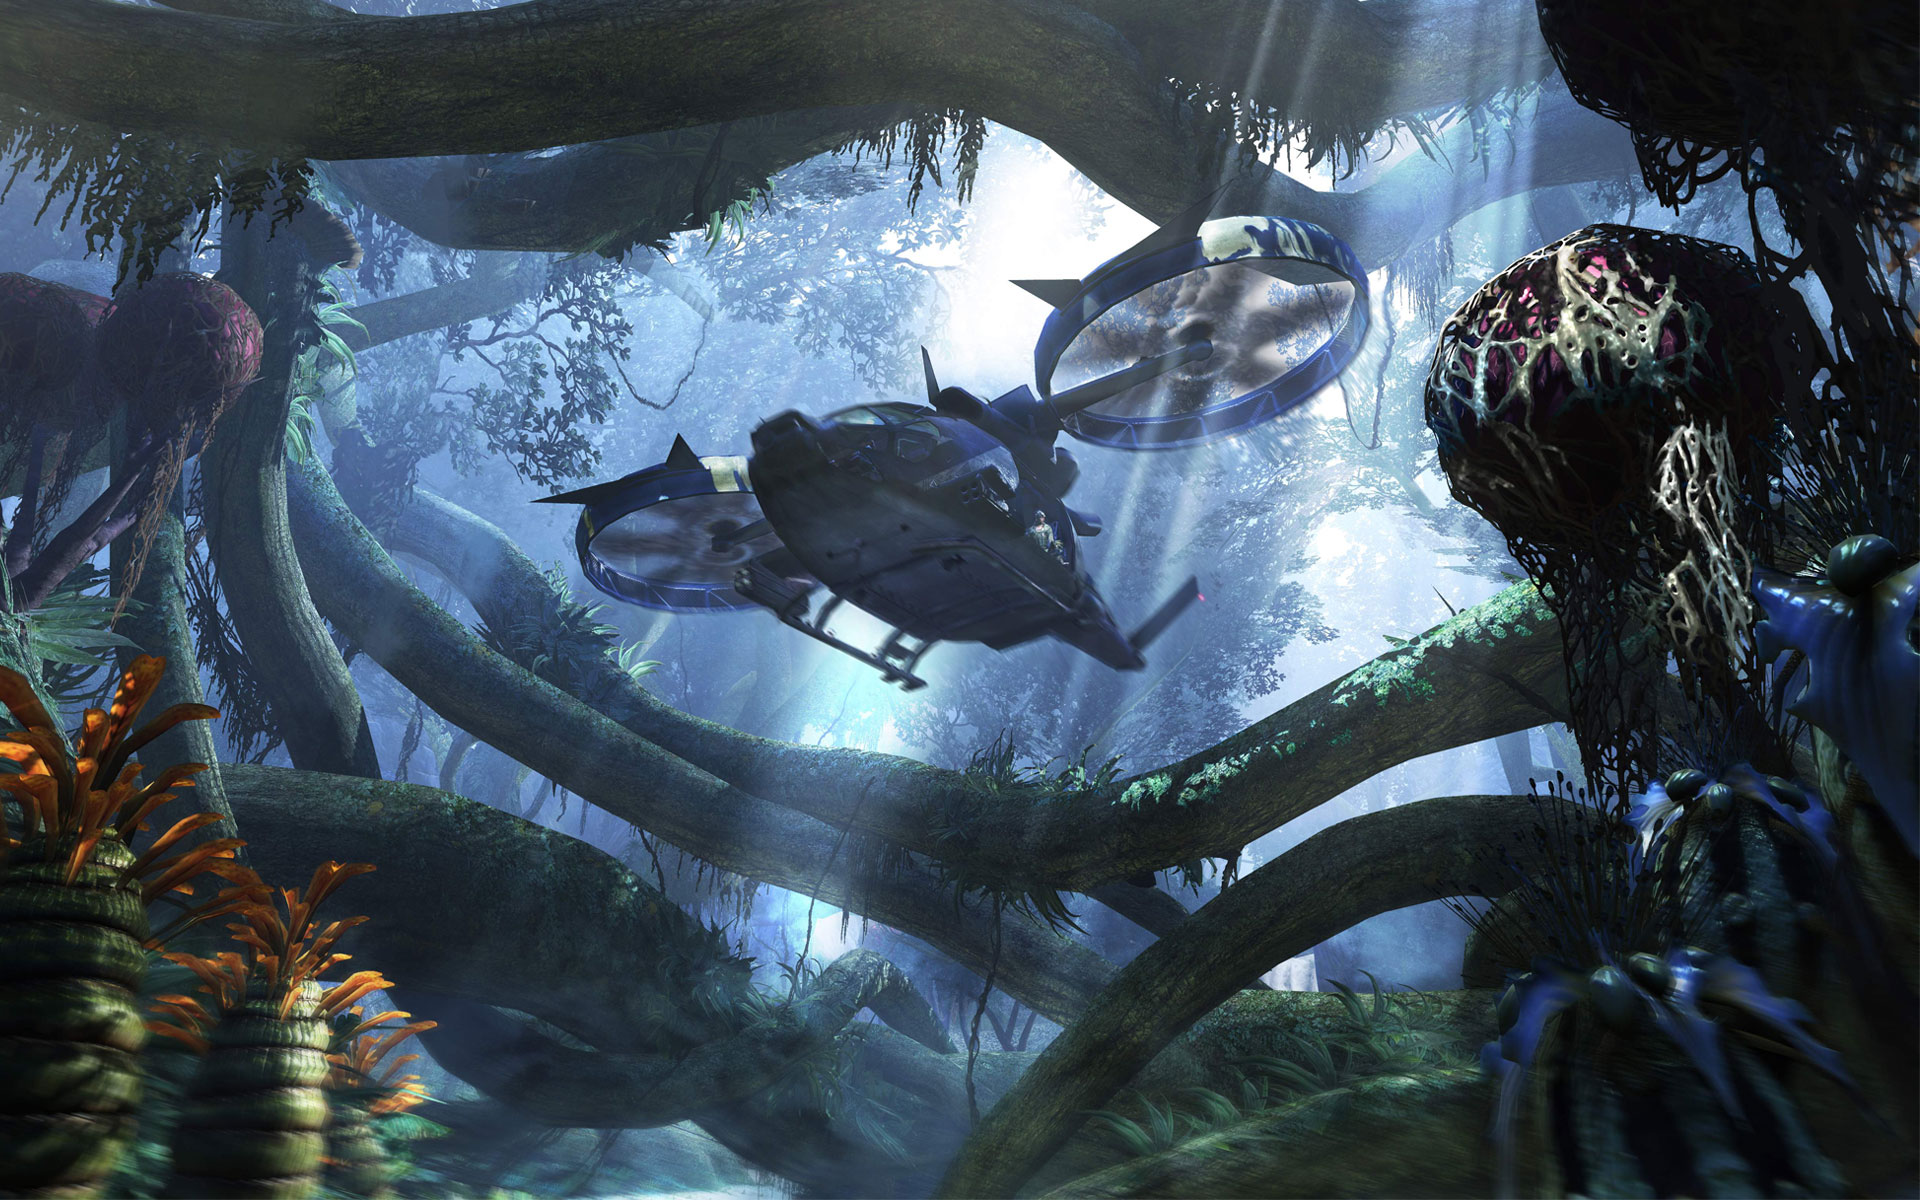 Amazing HD Wallpaper Of The 3d Epic Movie Avatar Leawo Official